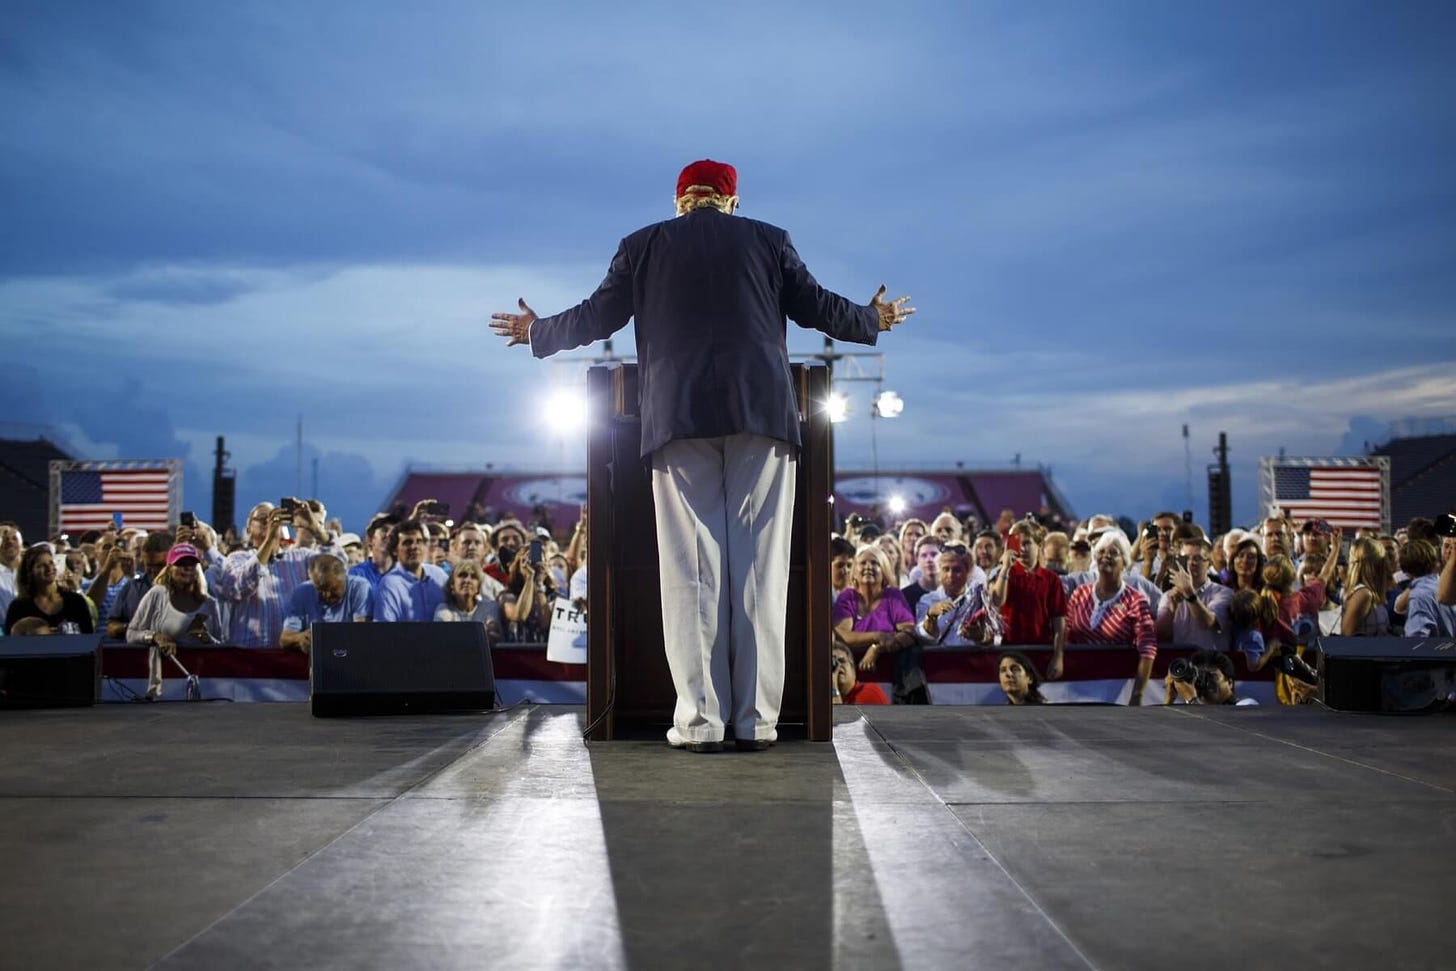 Trump rally draws 30,000 in Alabama - A Race Like No Other